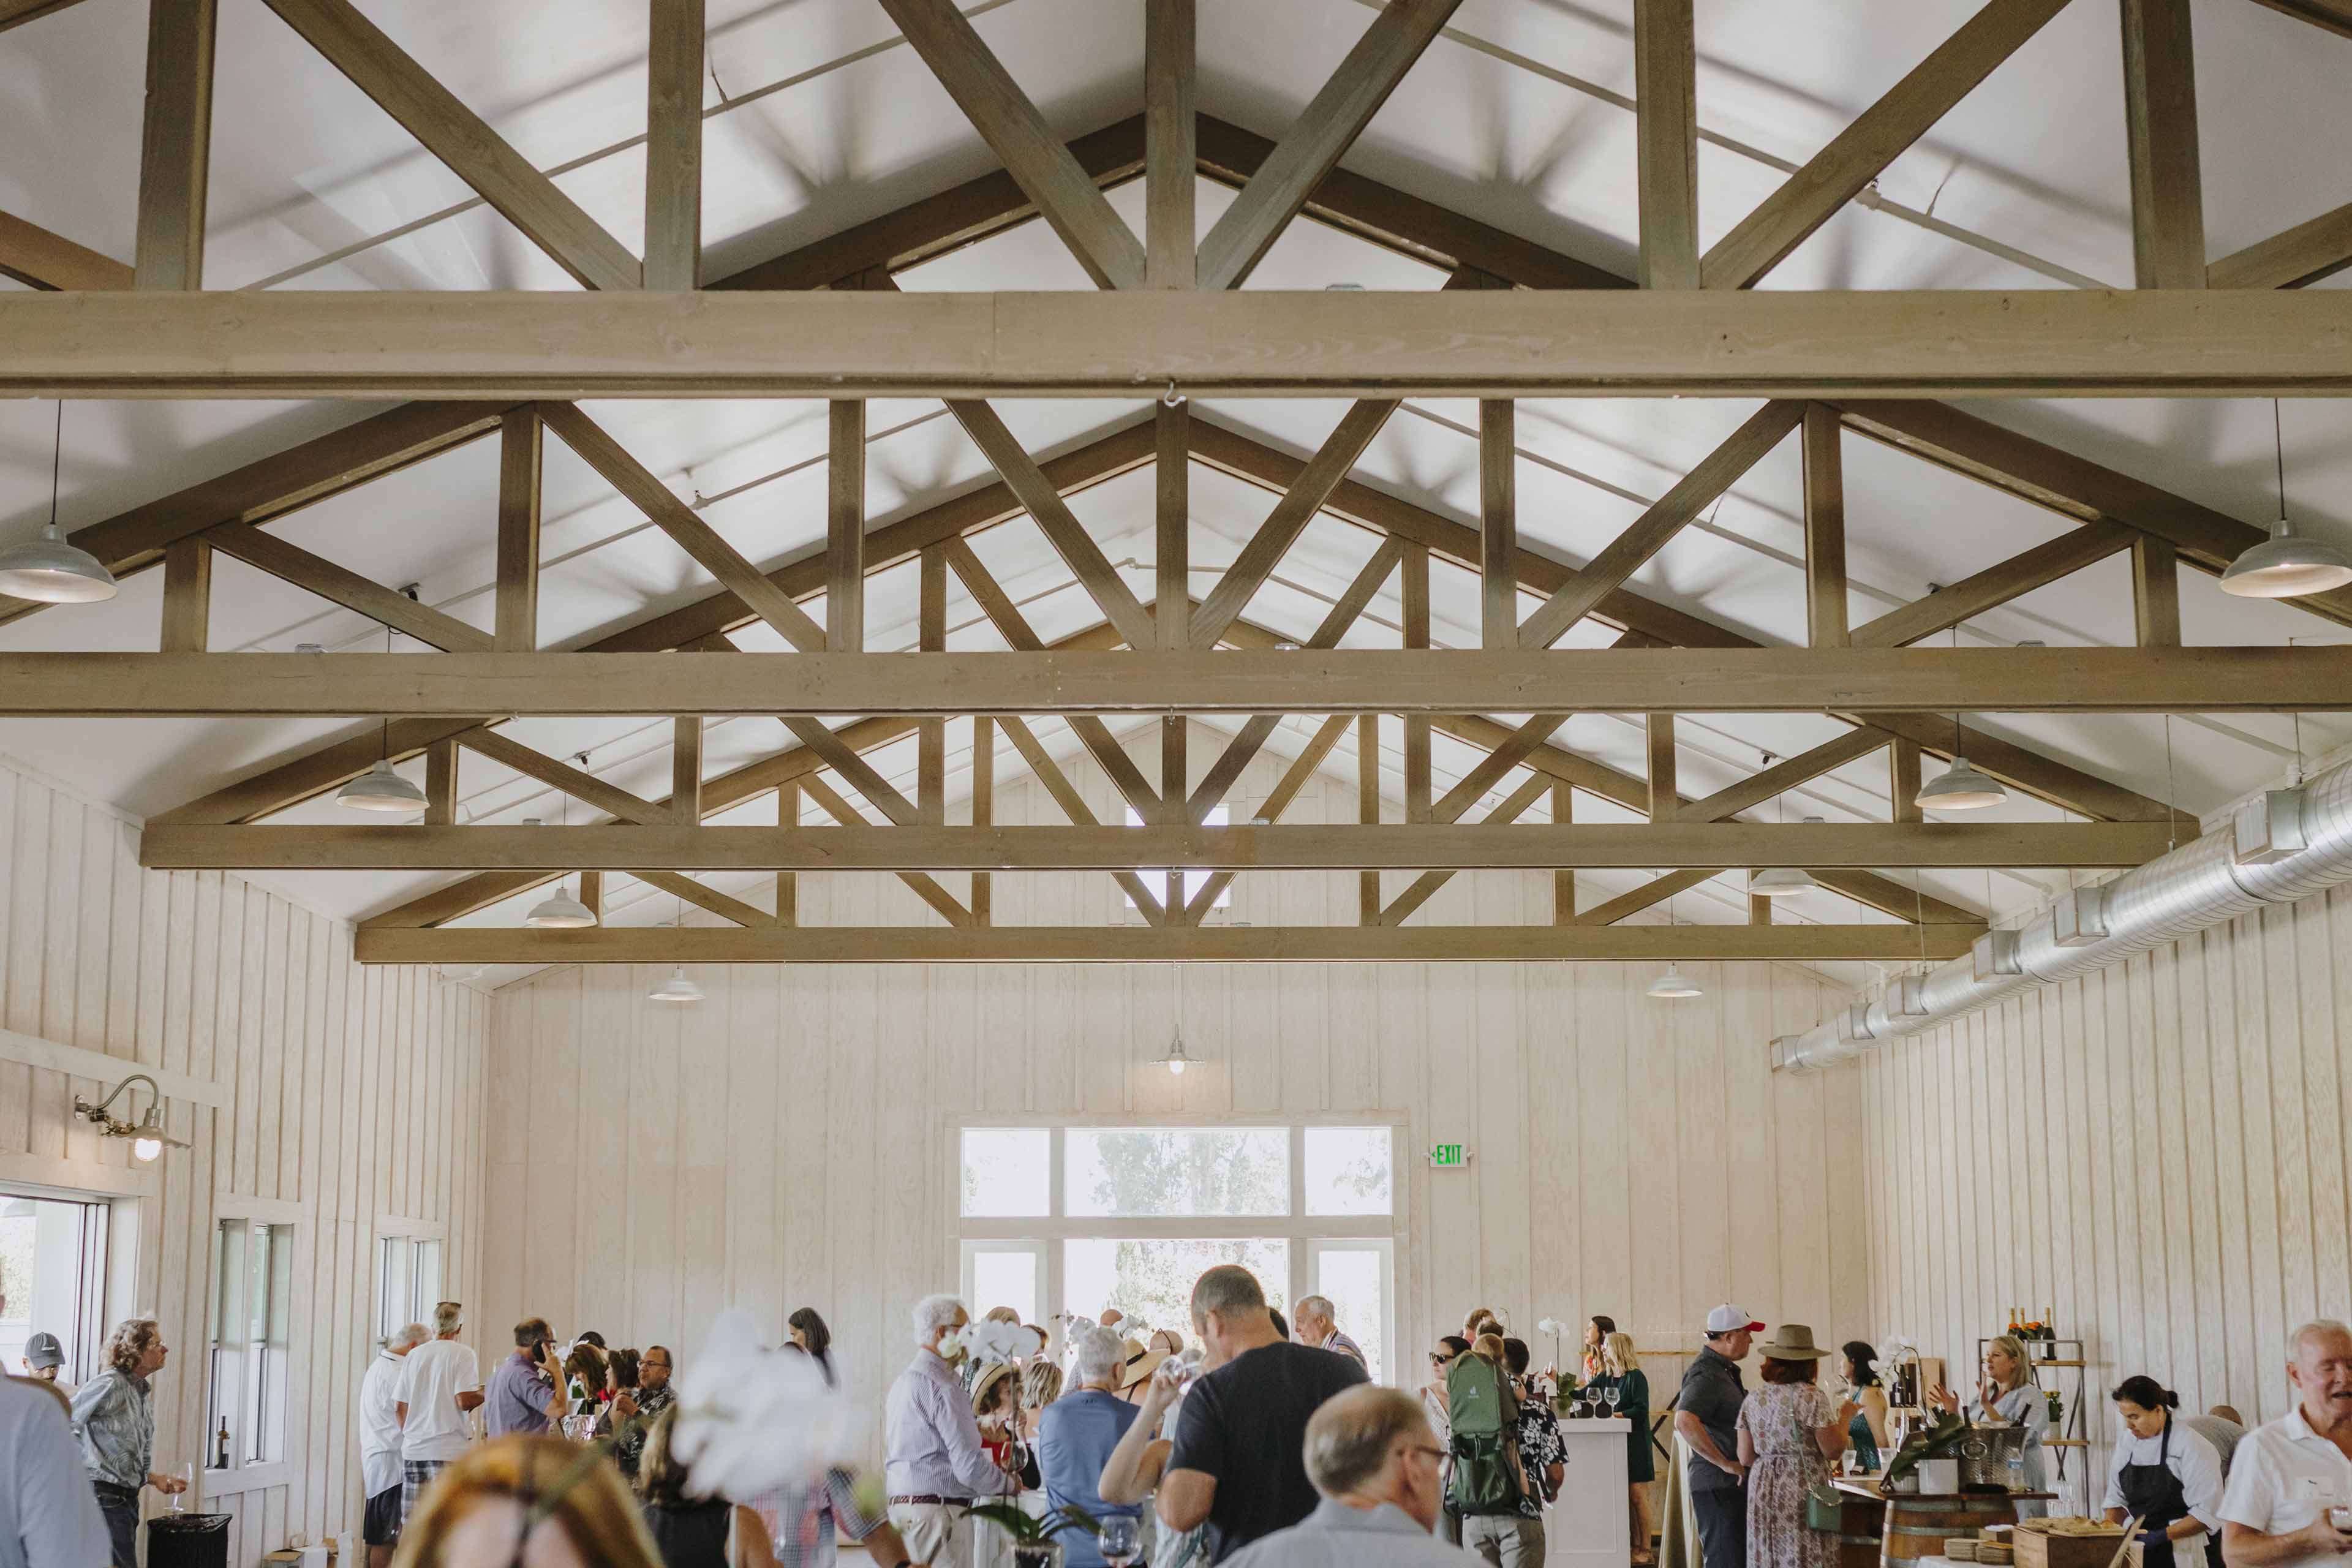 photo of the beams and ceiling details of the Barn at harrow cellars